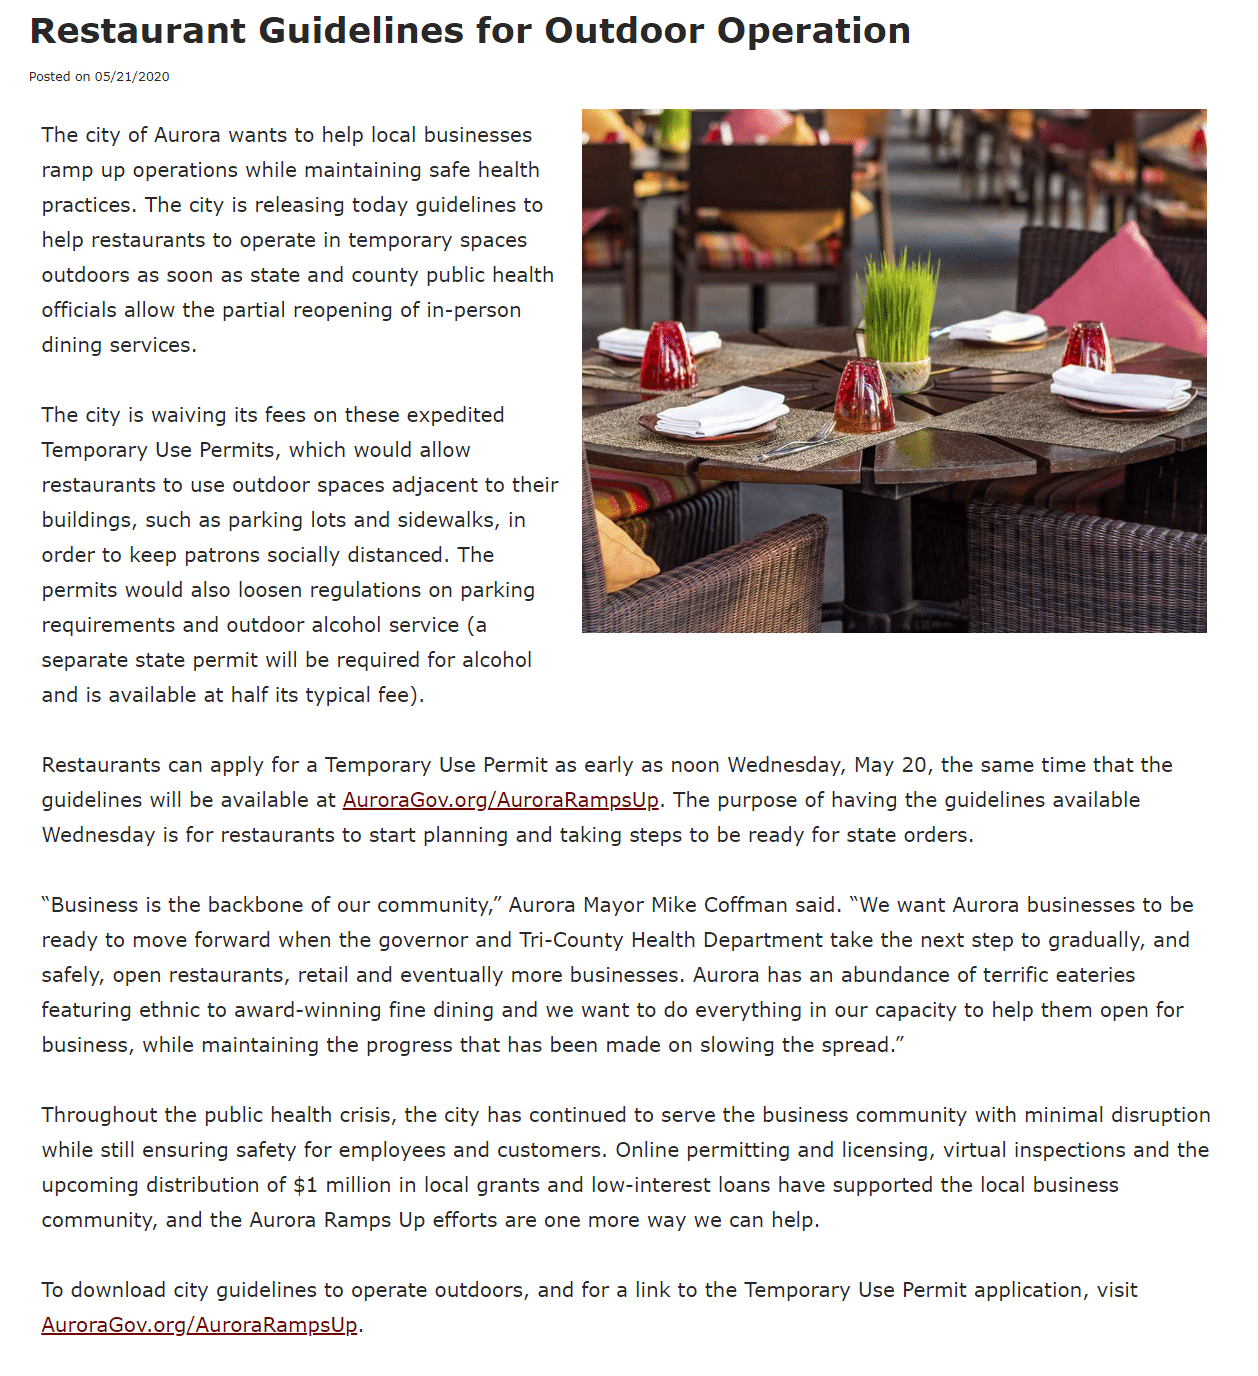 Restaurant Guidelines for Outdoor Operation